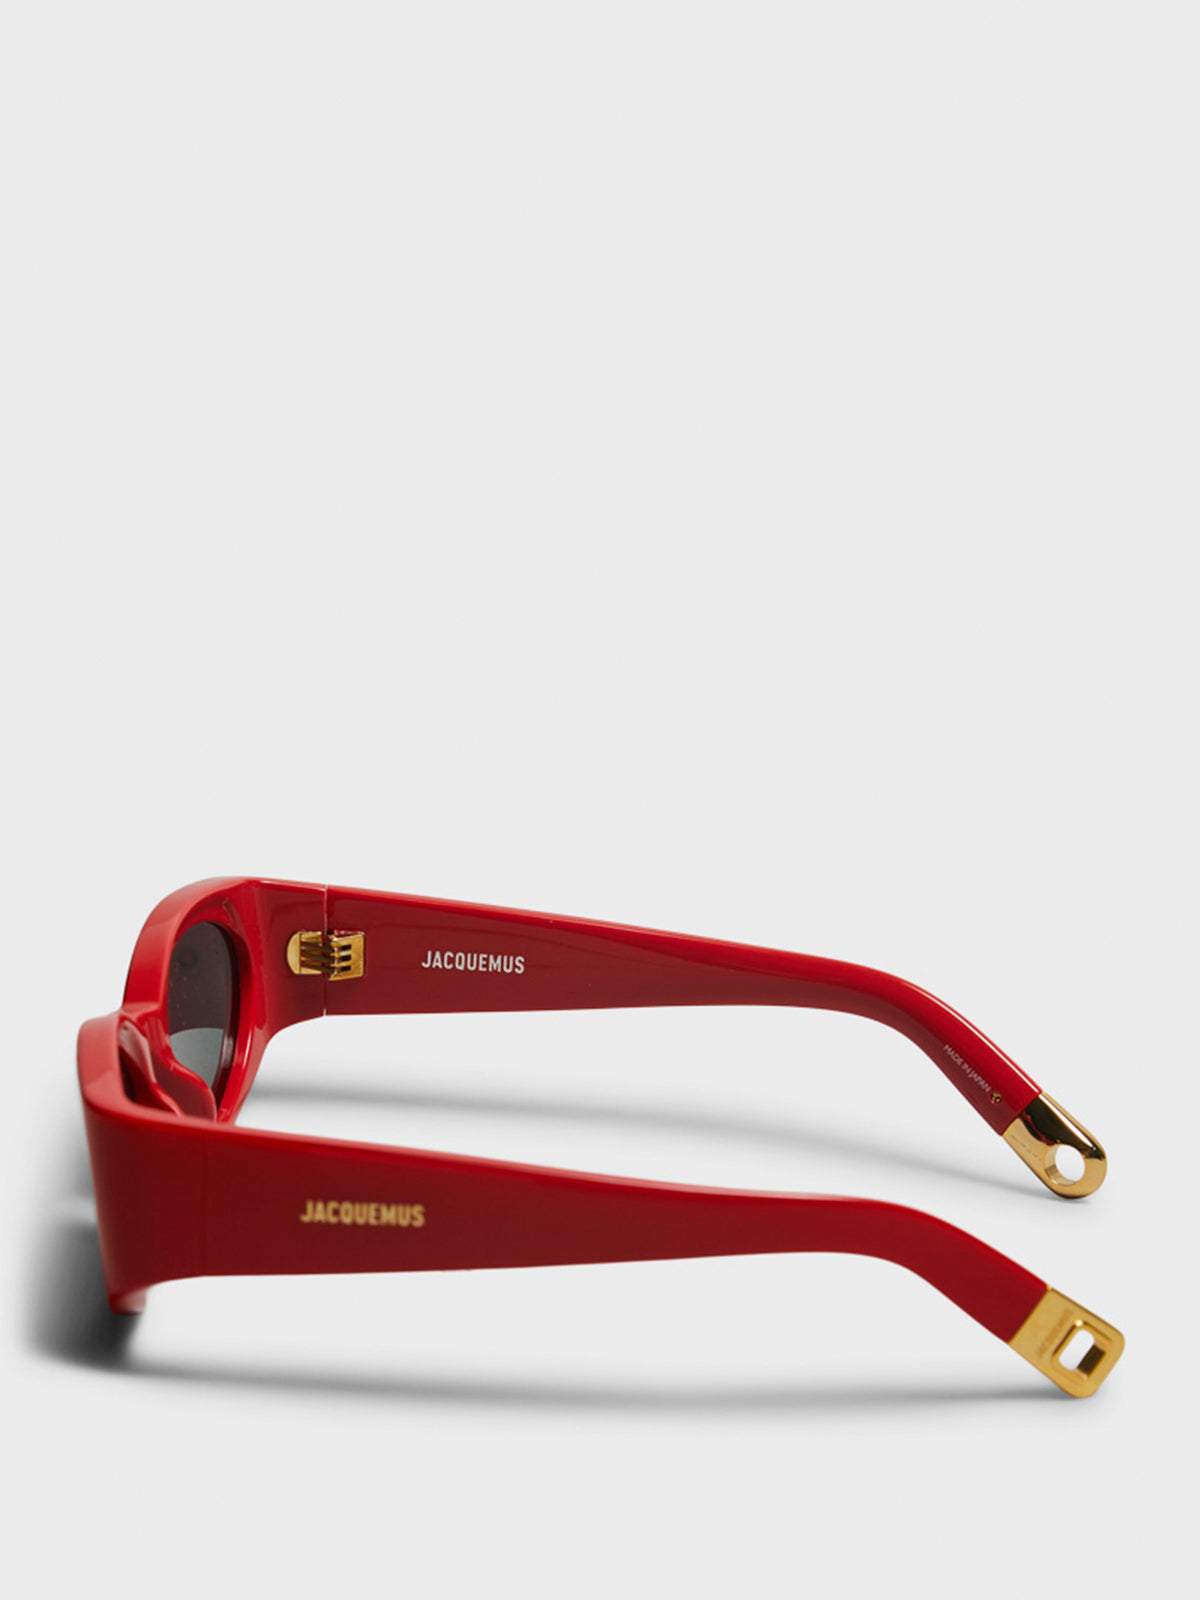 Ovalo Sunglasses in Red, Yellow Gold and Grey